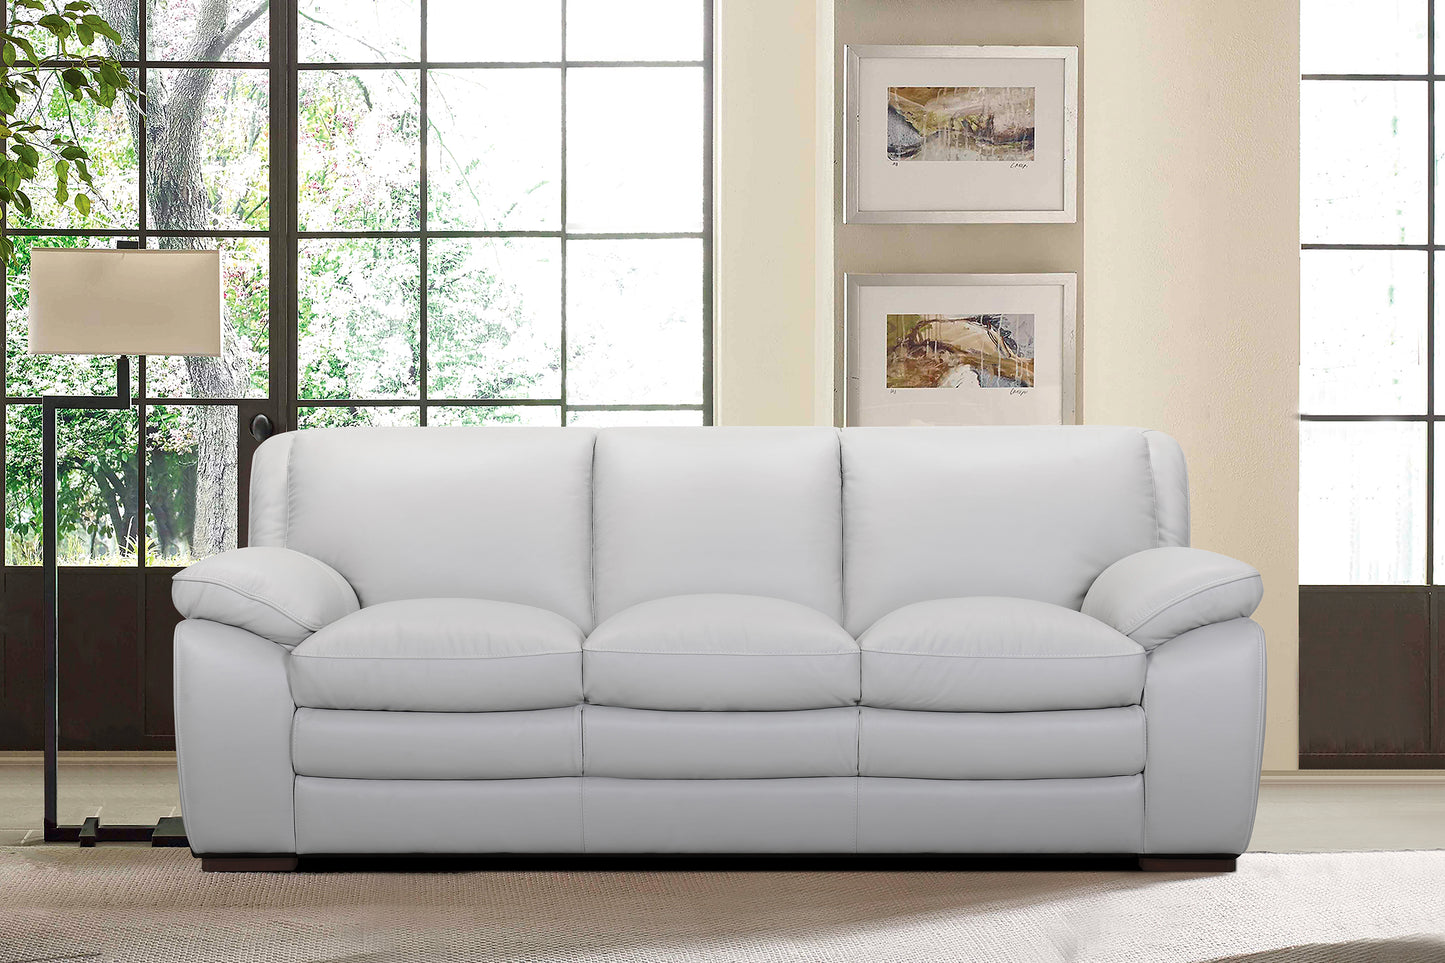 Zanna Contemporary Sofa in Genuine Dove Gray Leather with Brown Wood Legs